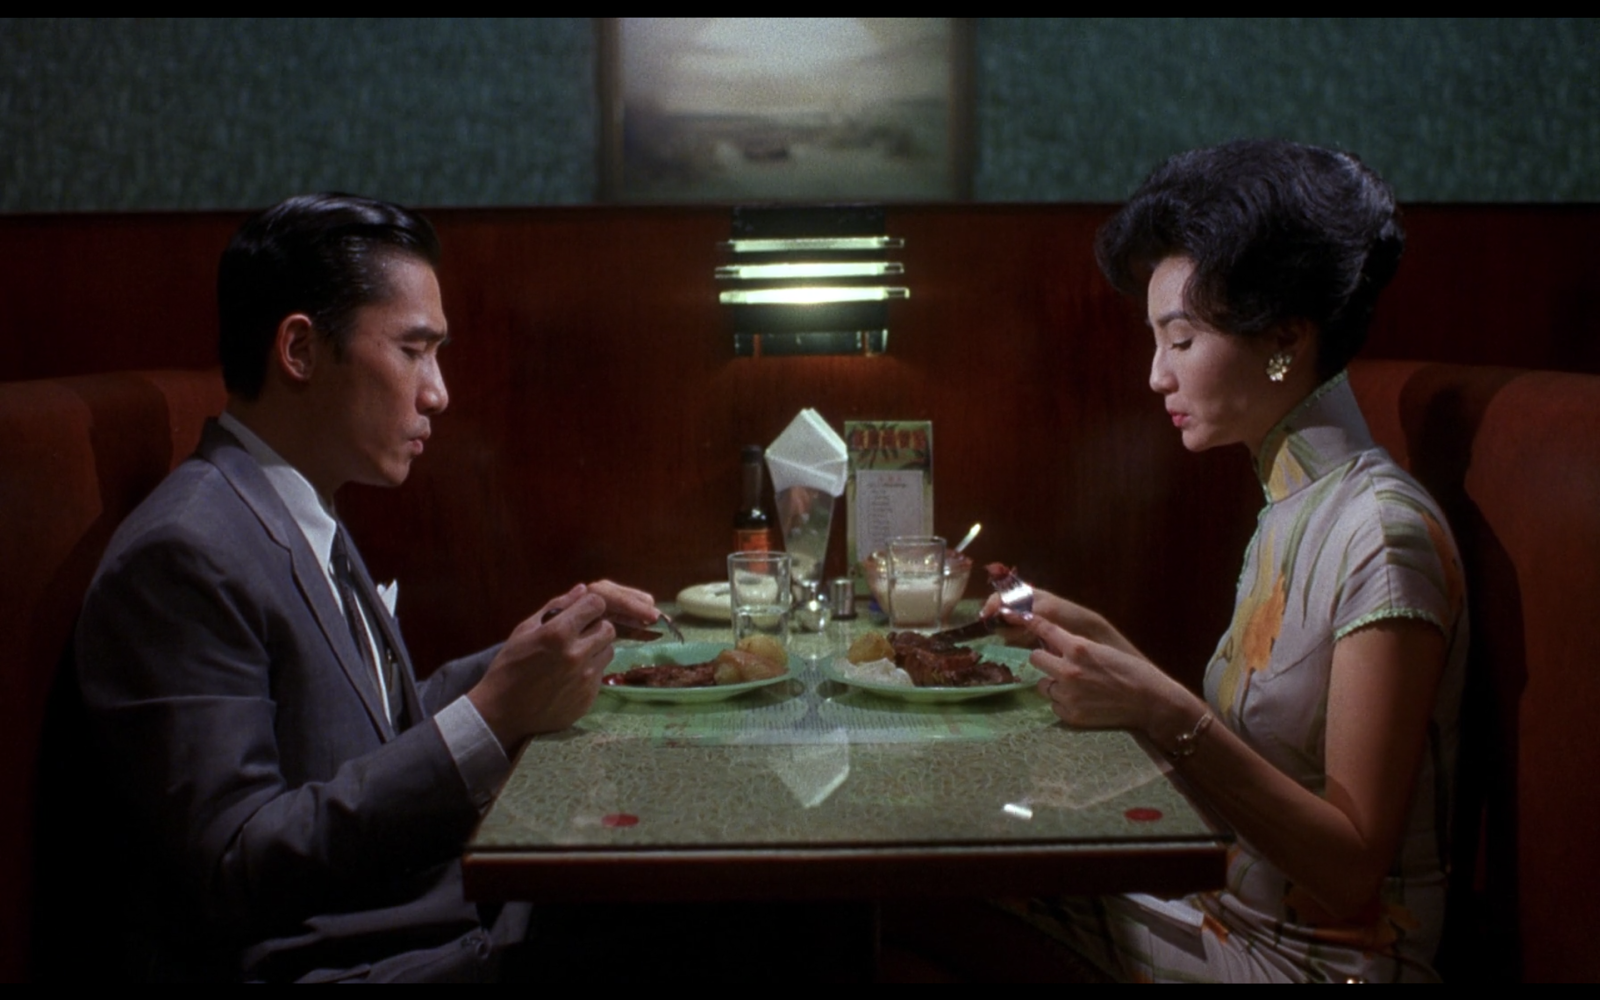 A screen still from the film In the Mood for Love, featuring the two main characters, Mrs. Chan and Chow Mo-wan, sitting across from each other as they eat in a restaurant.